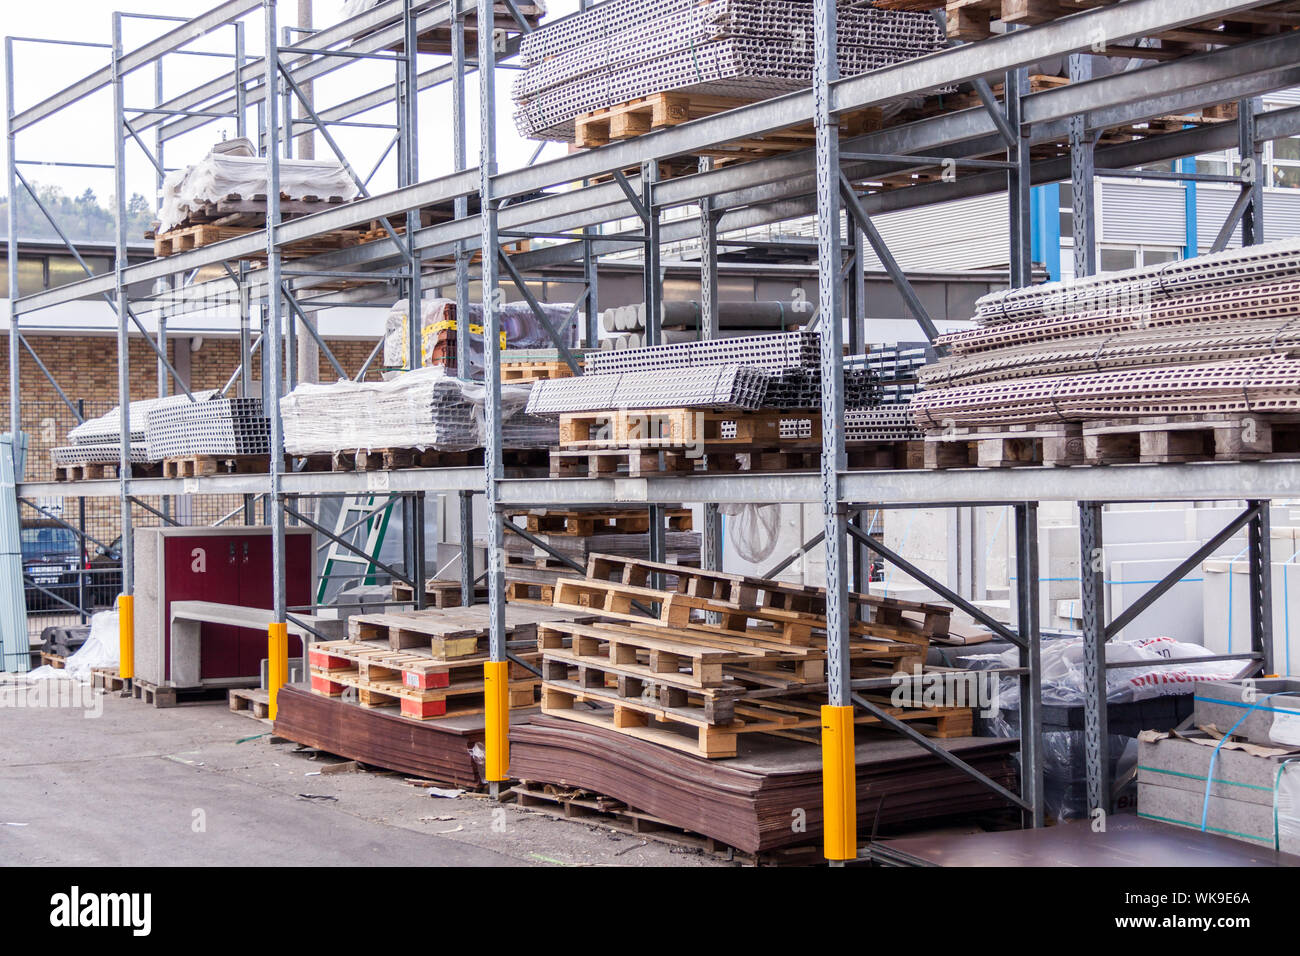 Building and construction materials in a warehouse Stock Photo